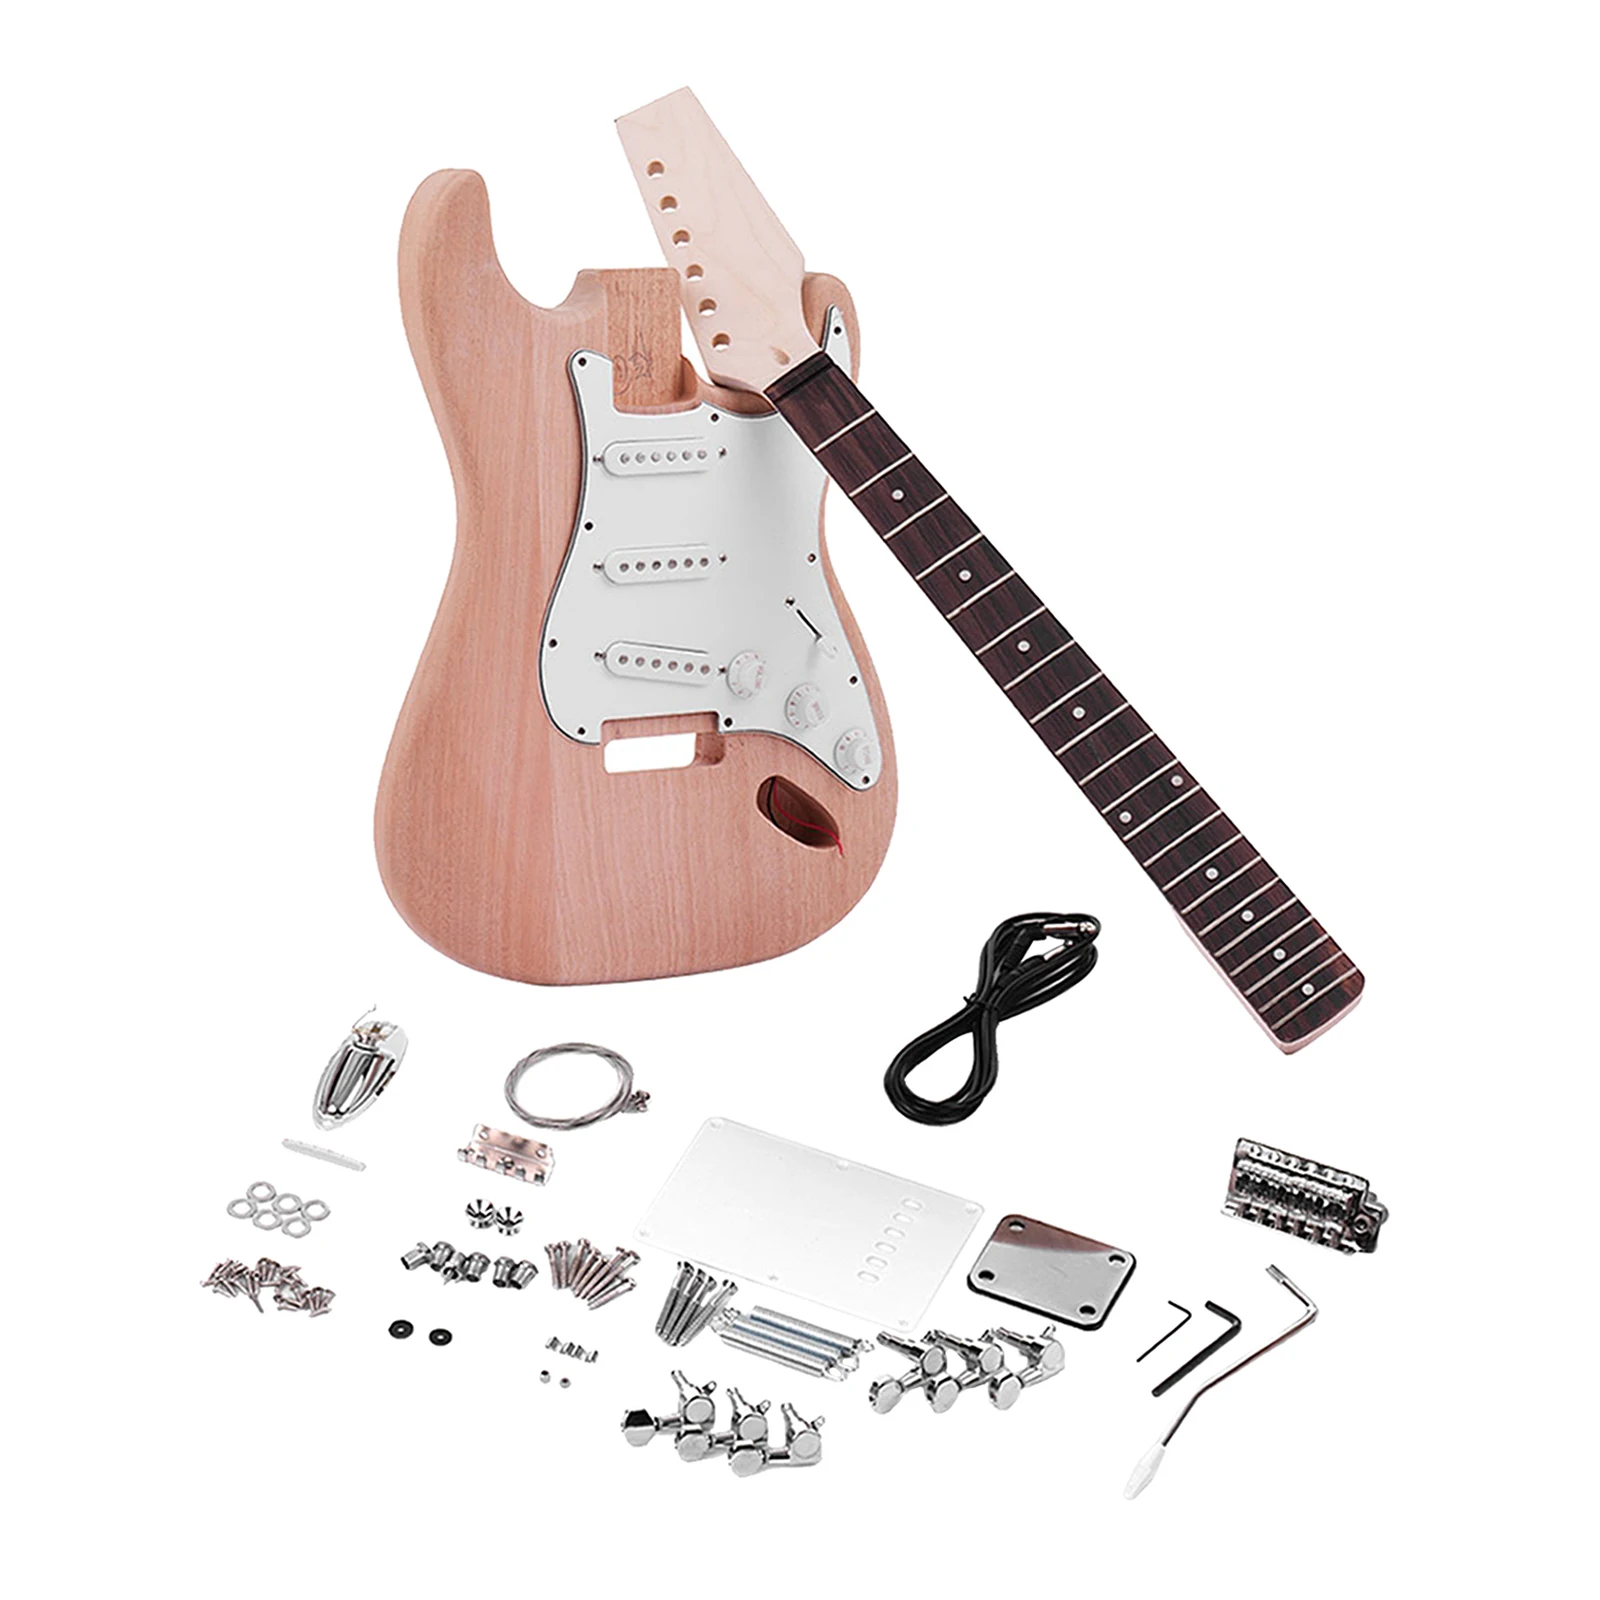 Unfinished DIY Electric Guitar Kit for Beginner Professional Performance